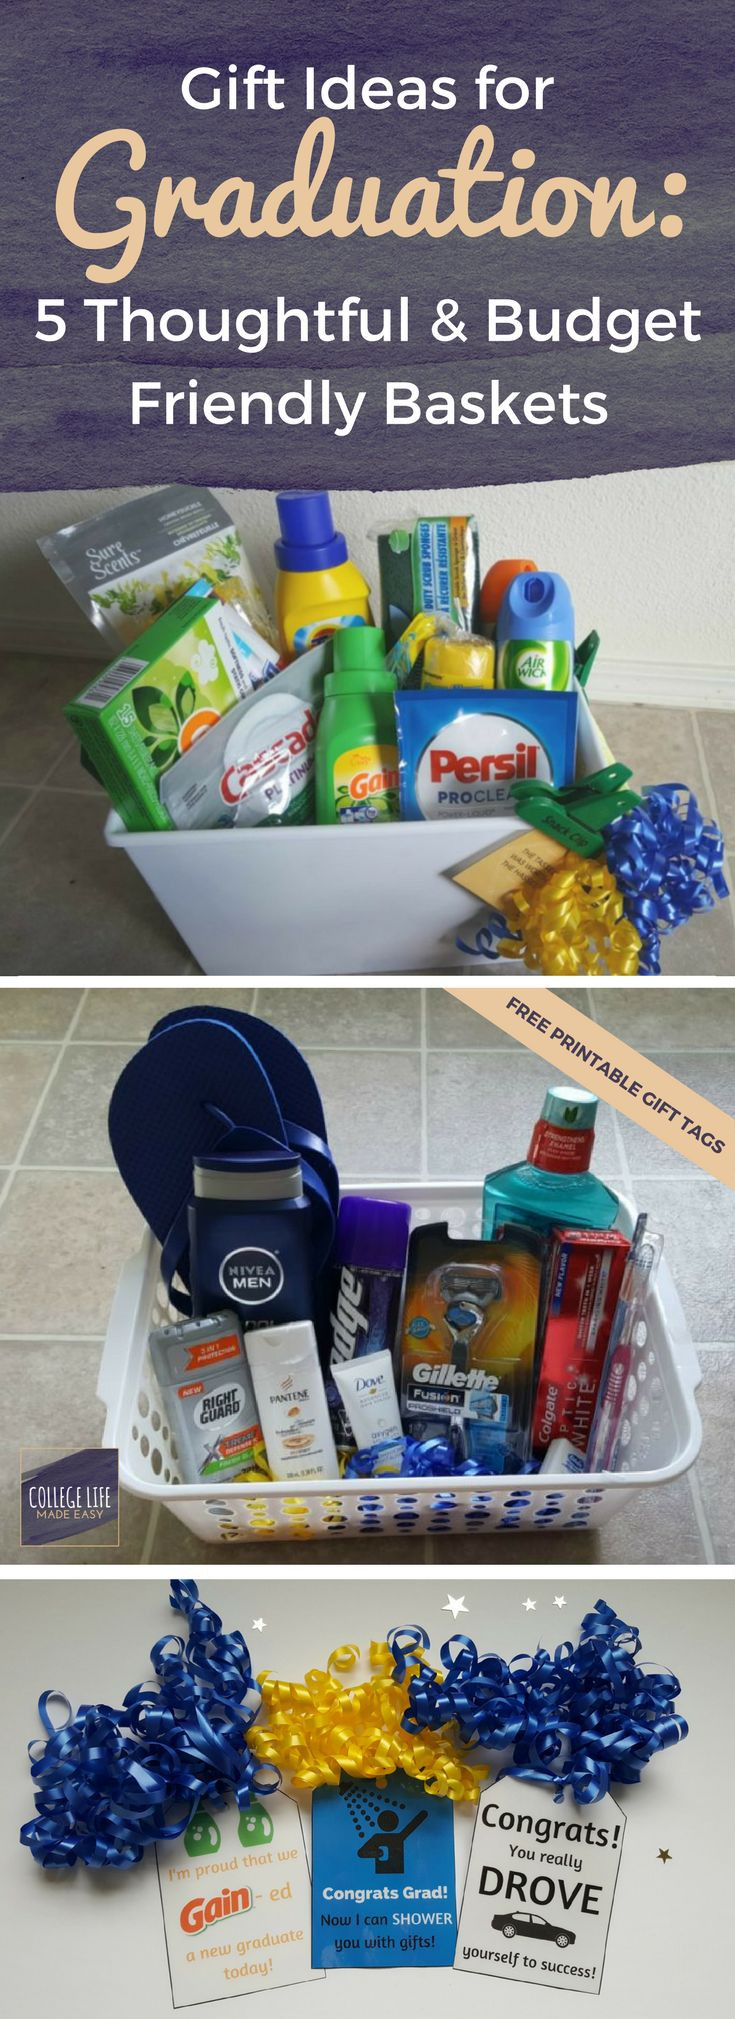 College Graduation Gift Ideas For Her
 17 Best ideas about College Graduation Gifts on Pinterest